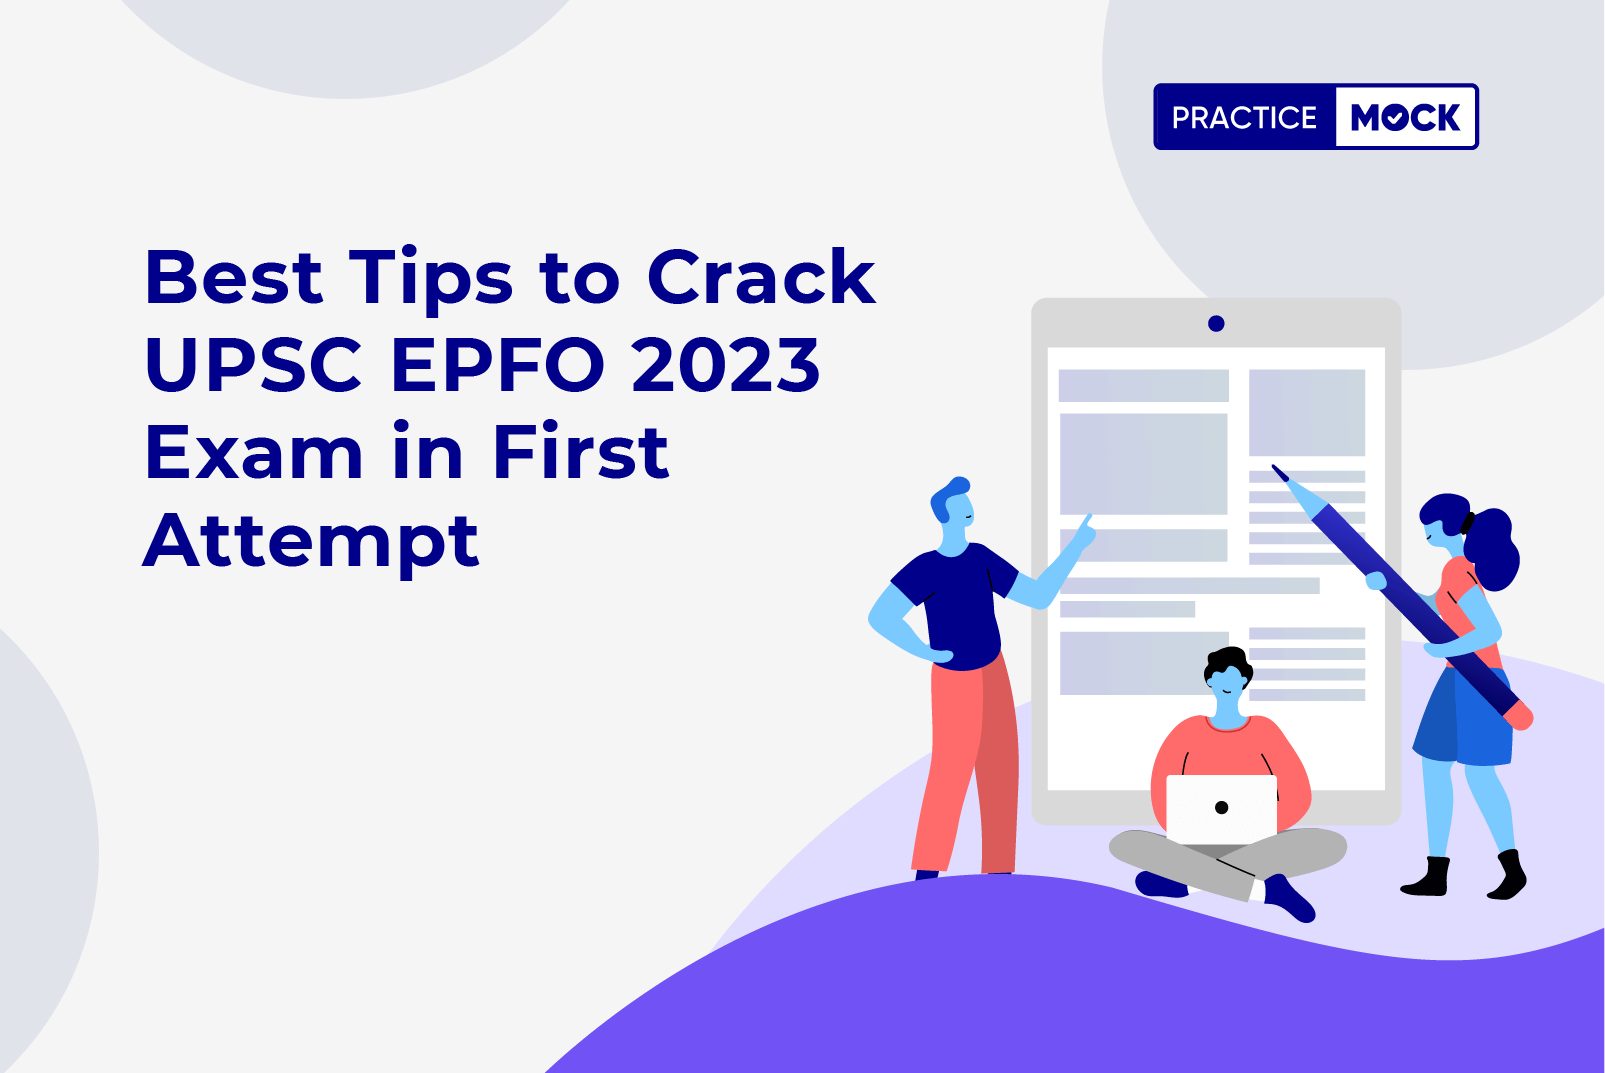 Strategy to Crack UPSC EPFO 2023 Exam in First Attempt?